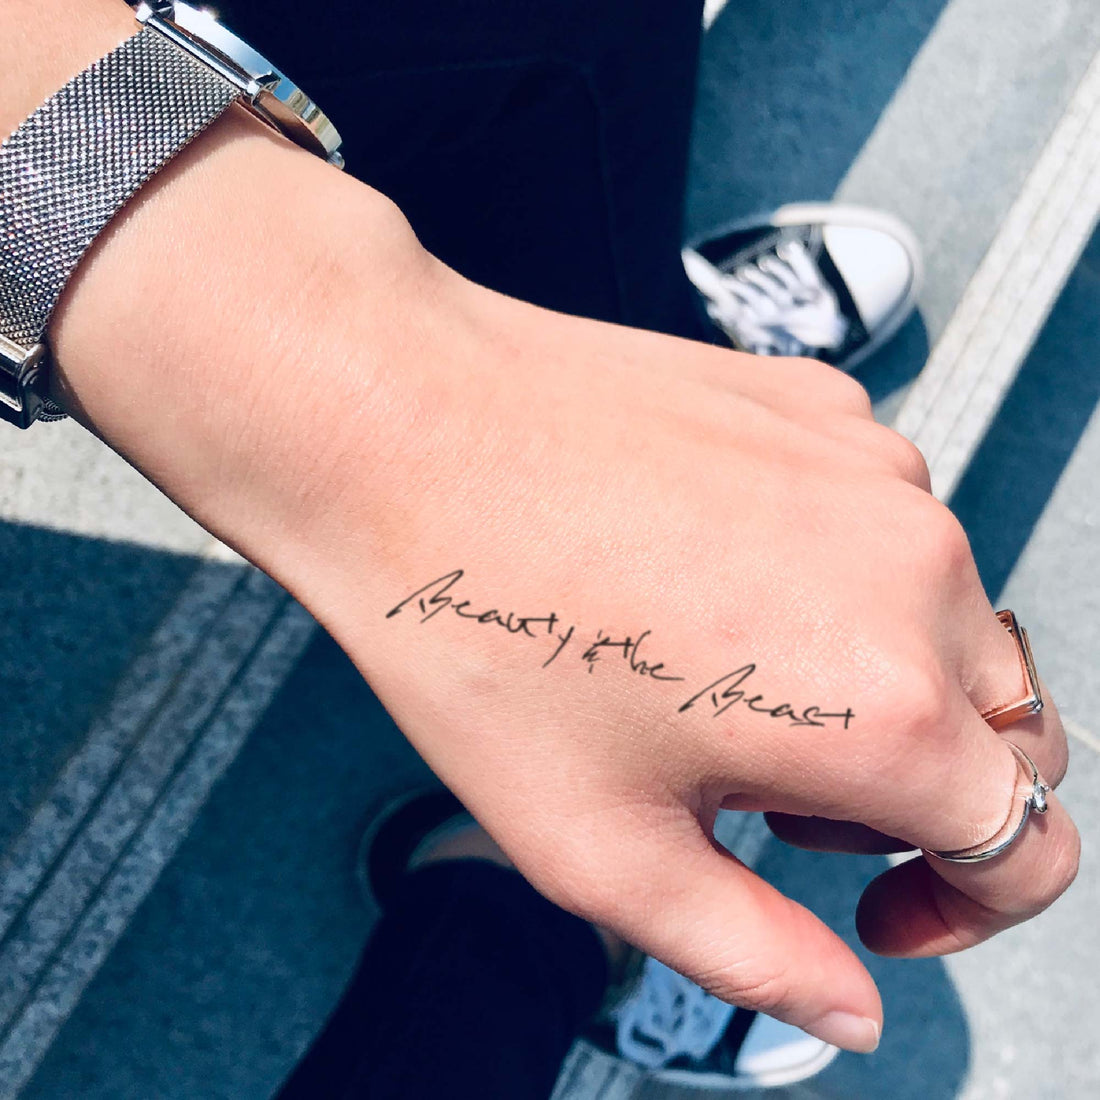 Beauty and the Beast custom temporary tattoo sticker design idea inspiration meanings removal arm wrist hand words font name signature calligraphy lyrics tour concert outfits merch accessory gift souvenir costumes wear dress up code